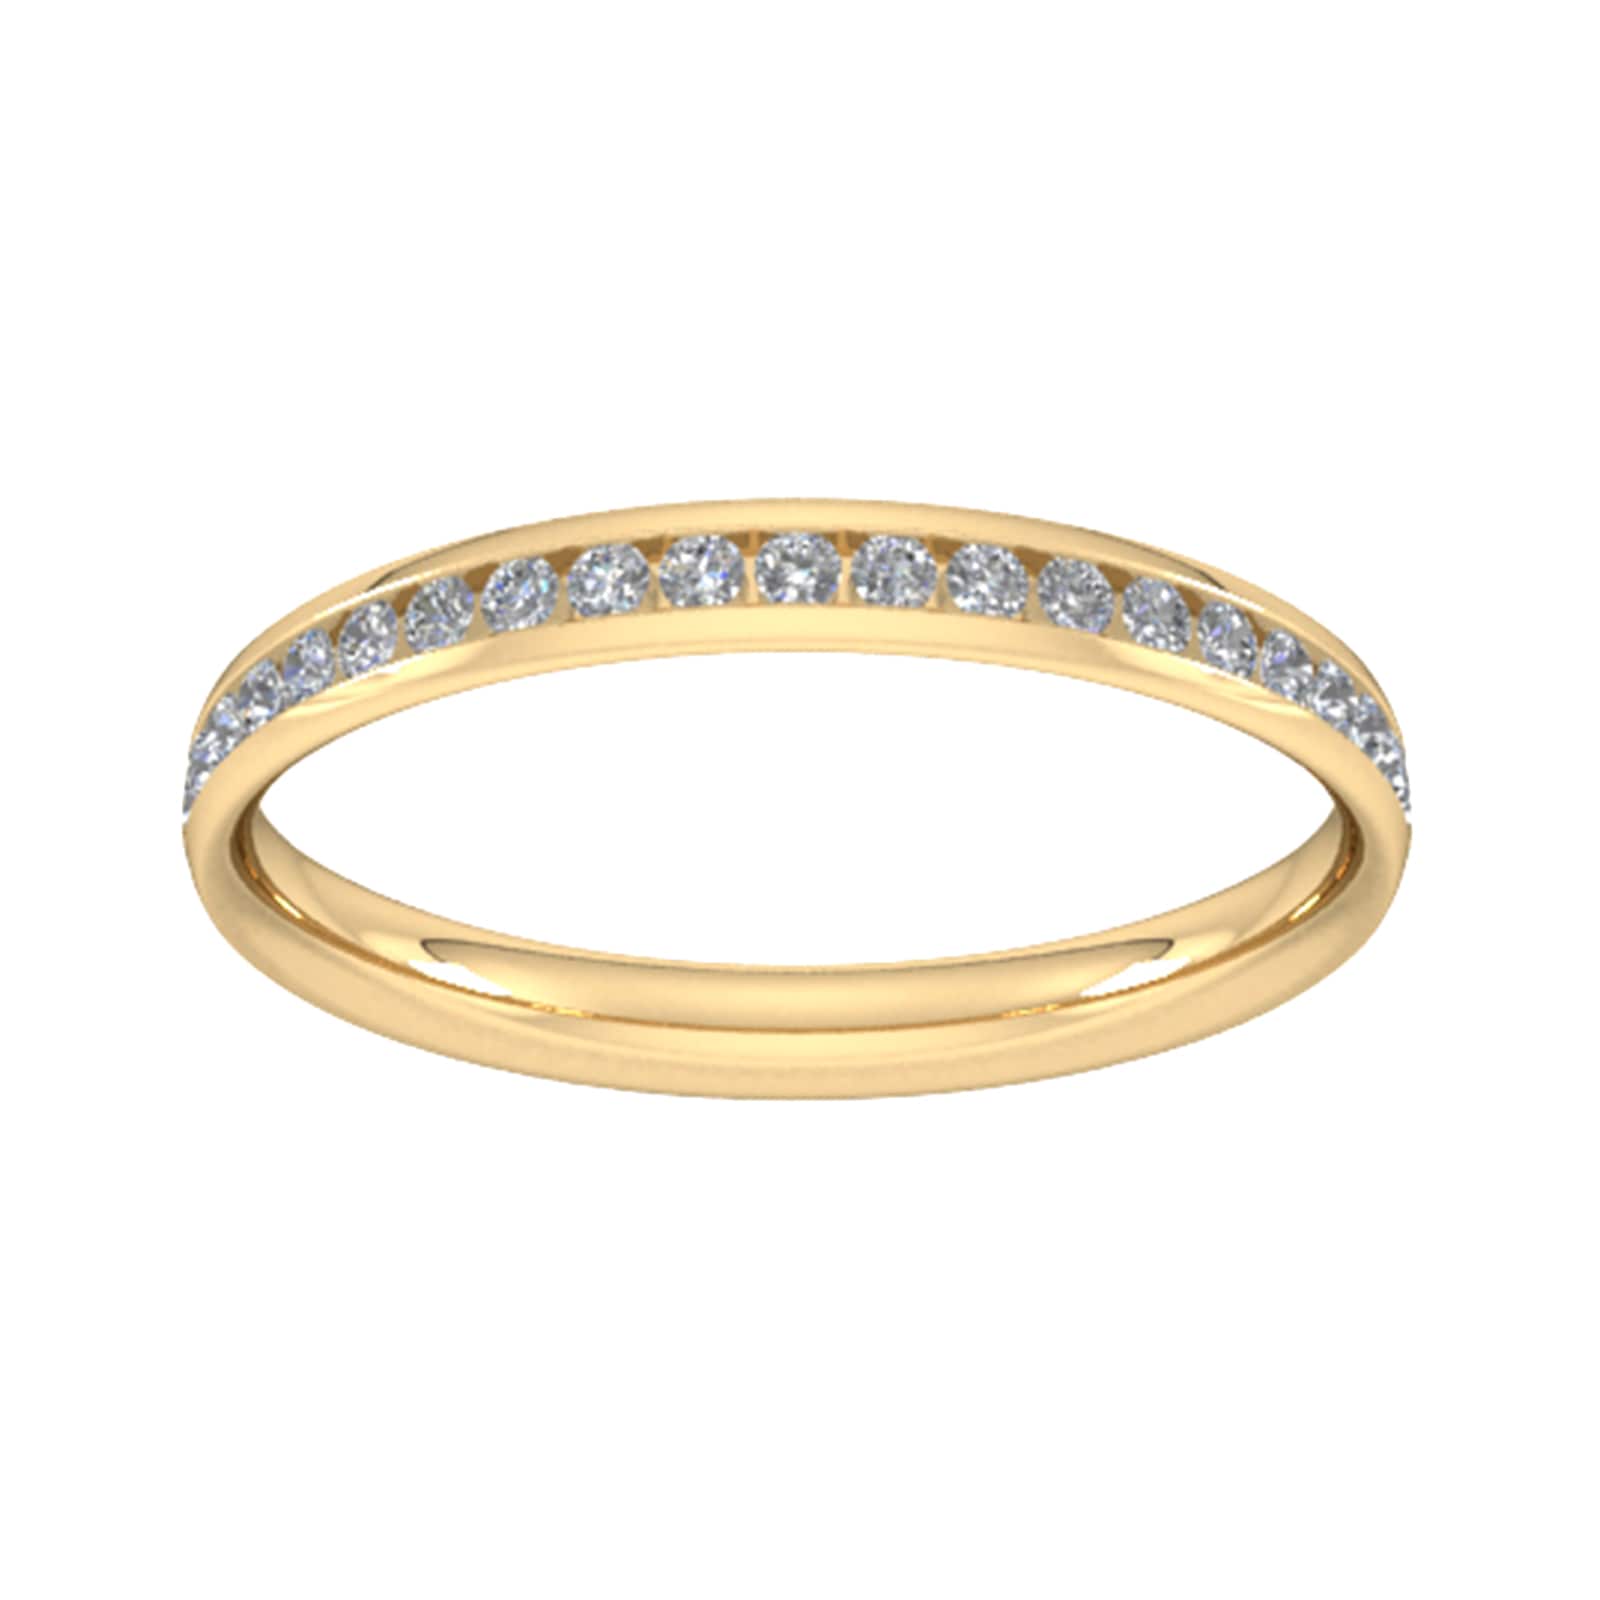 0.21 Carat Total Weight Half Channel Set Brilliant Cut Diamond Wedding Ring In 18 Carat Yellow Gold - Ring Size S